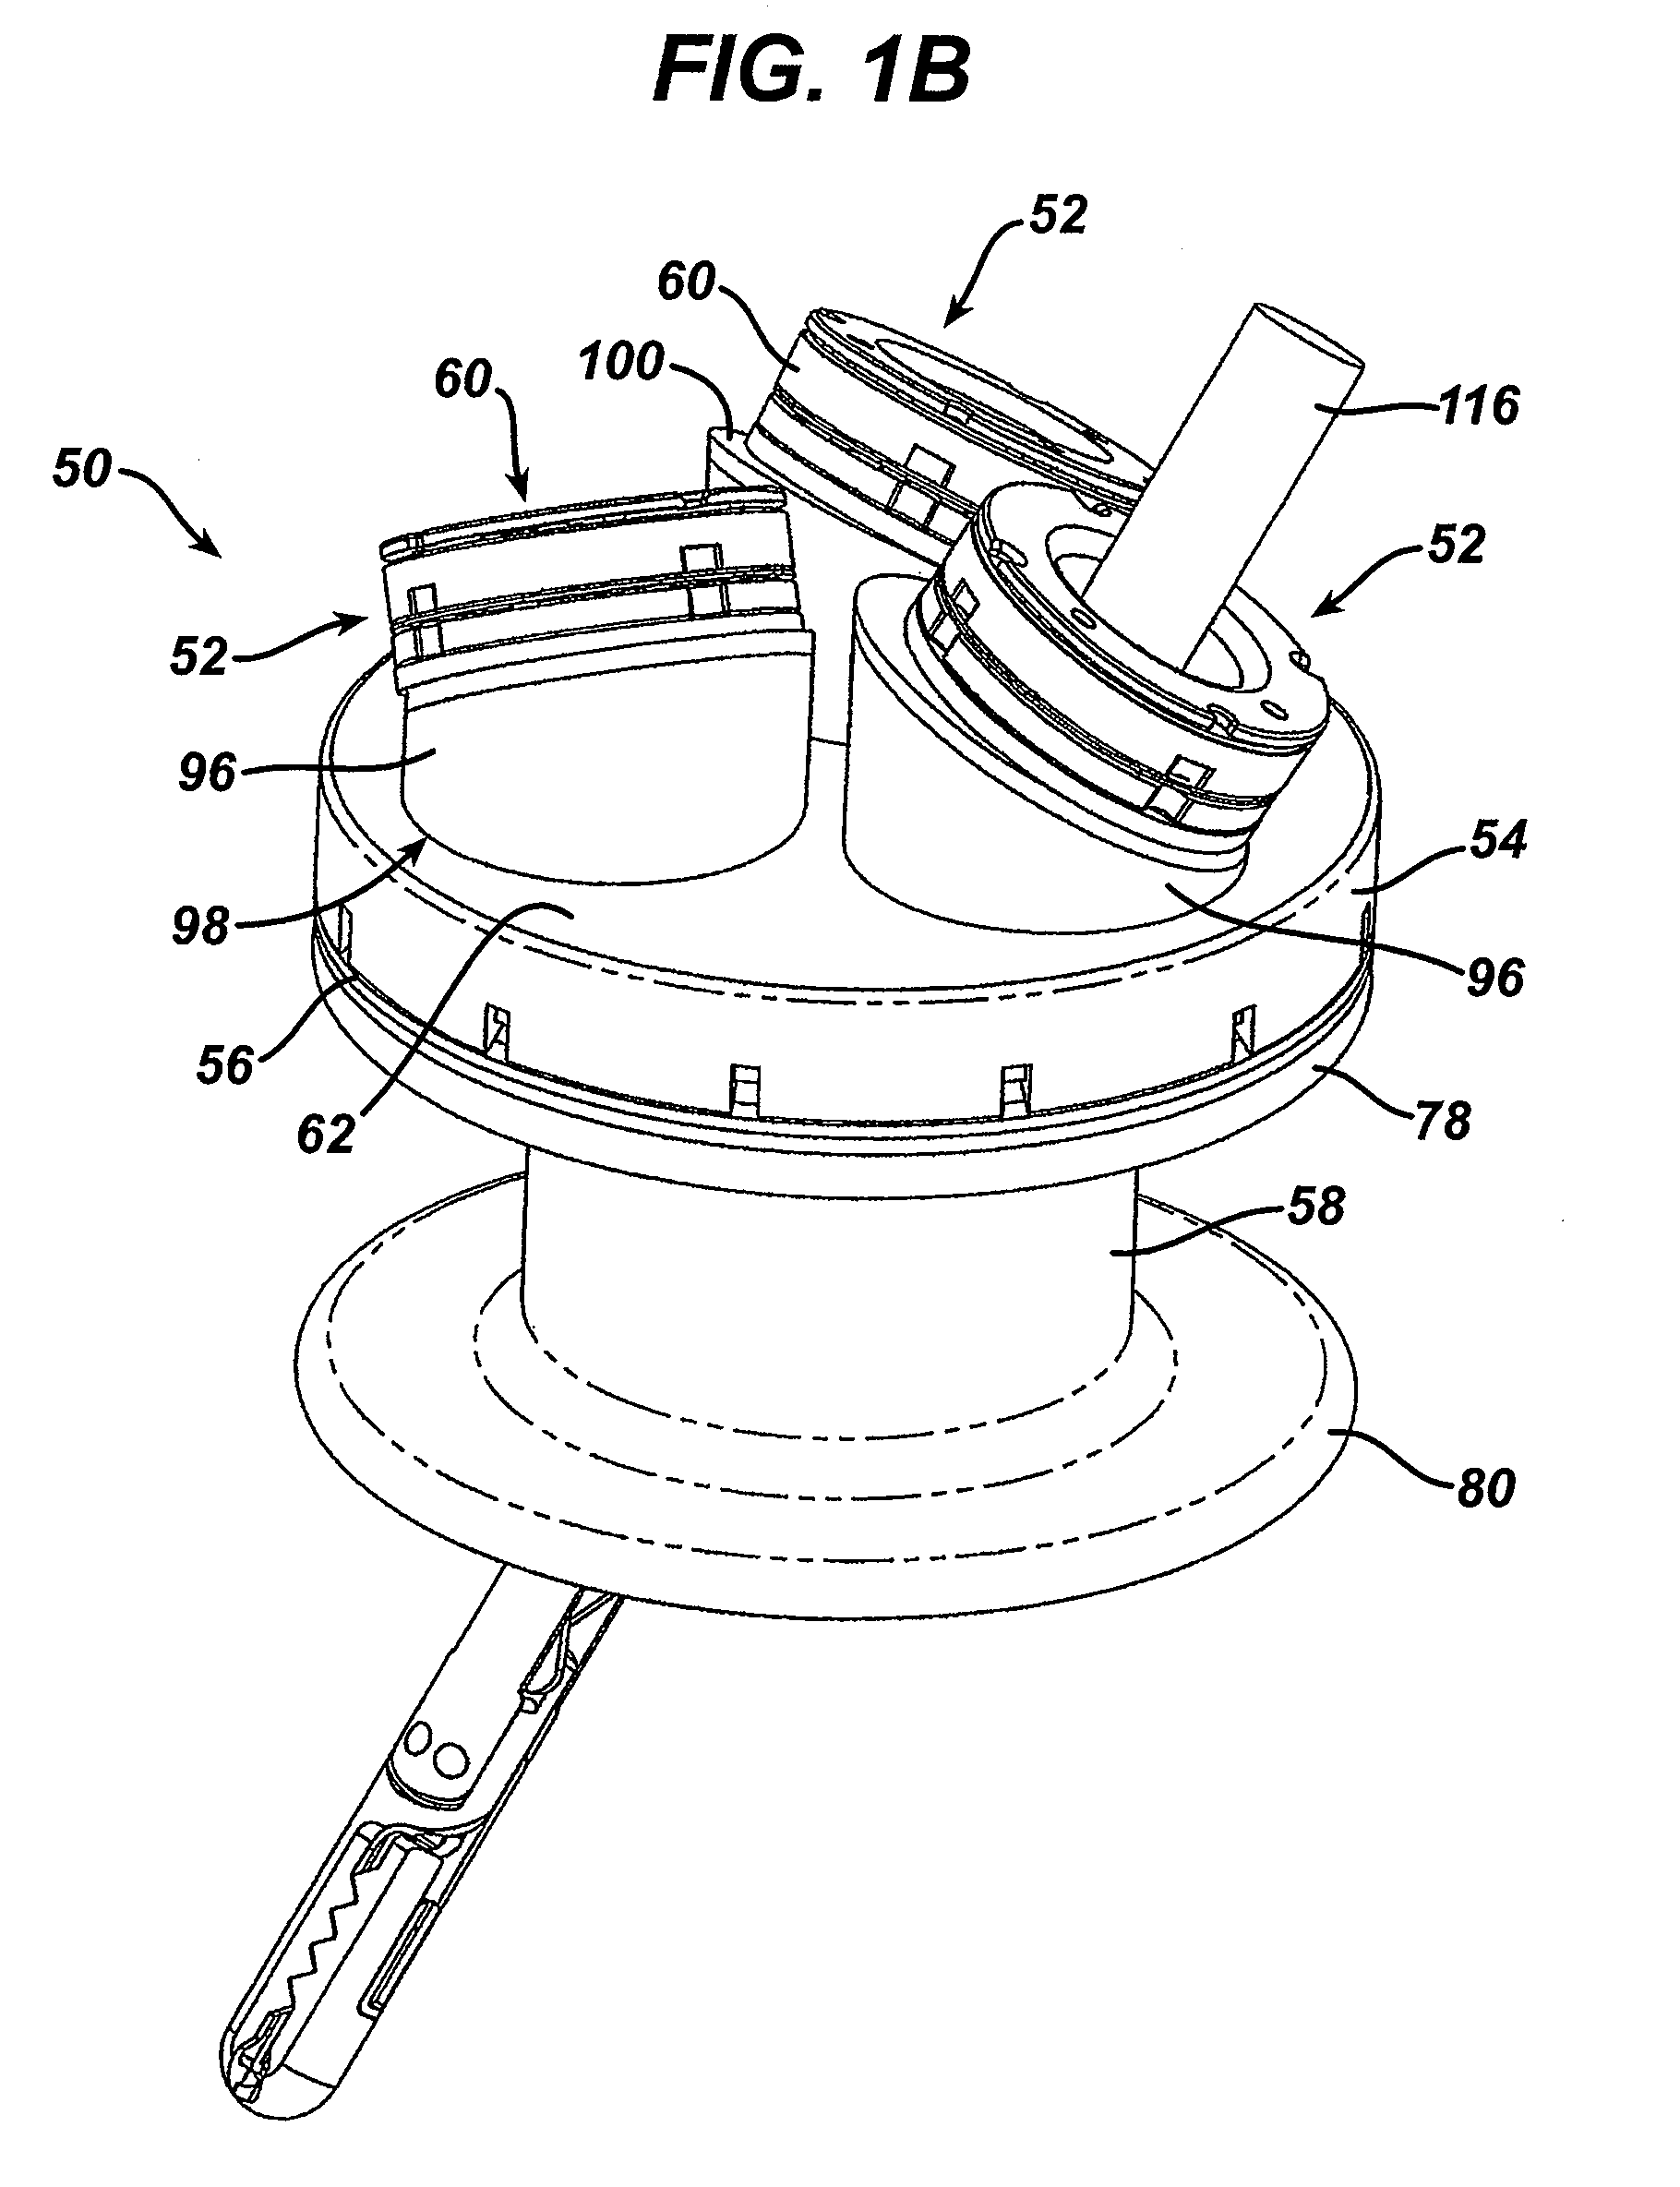 Multiple Port Surgical Access Device